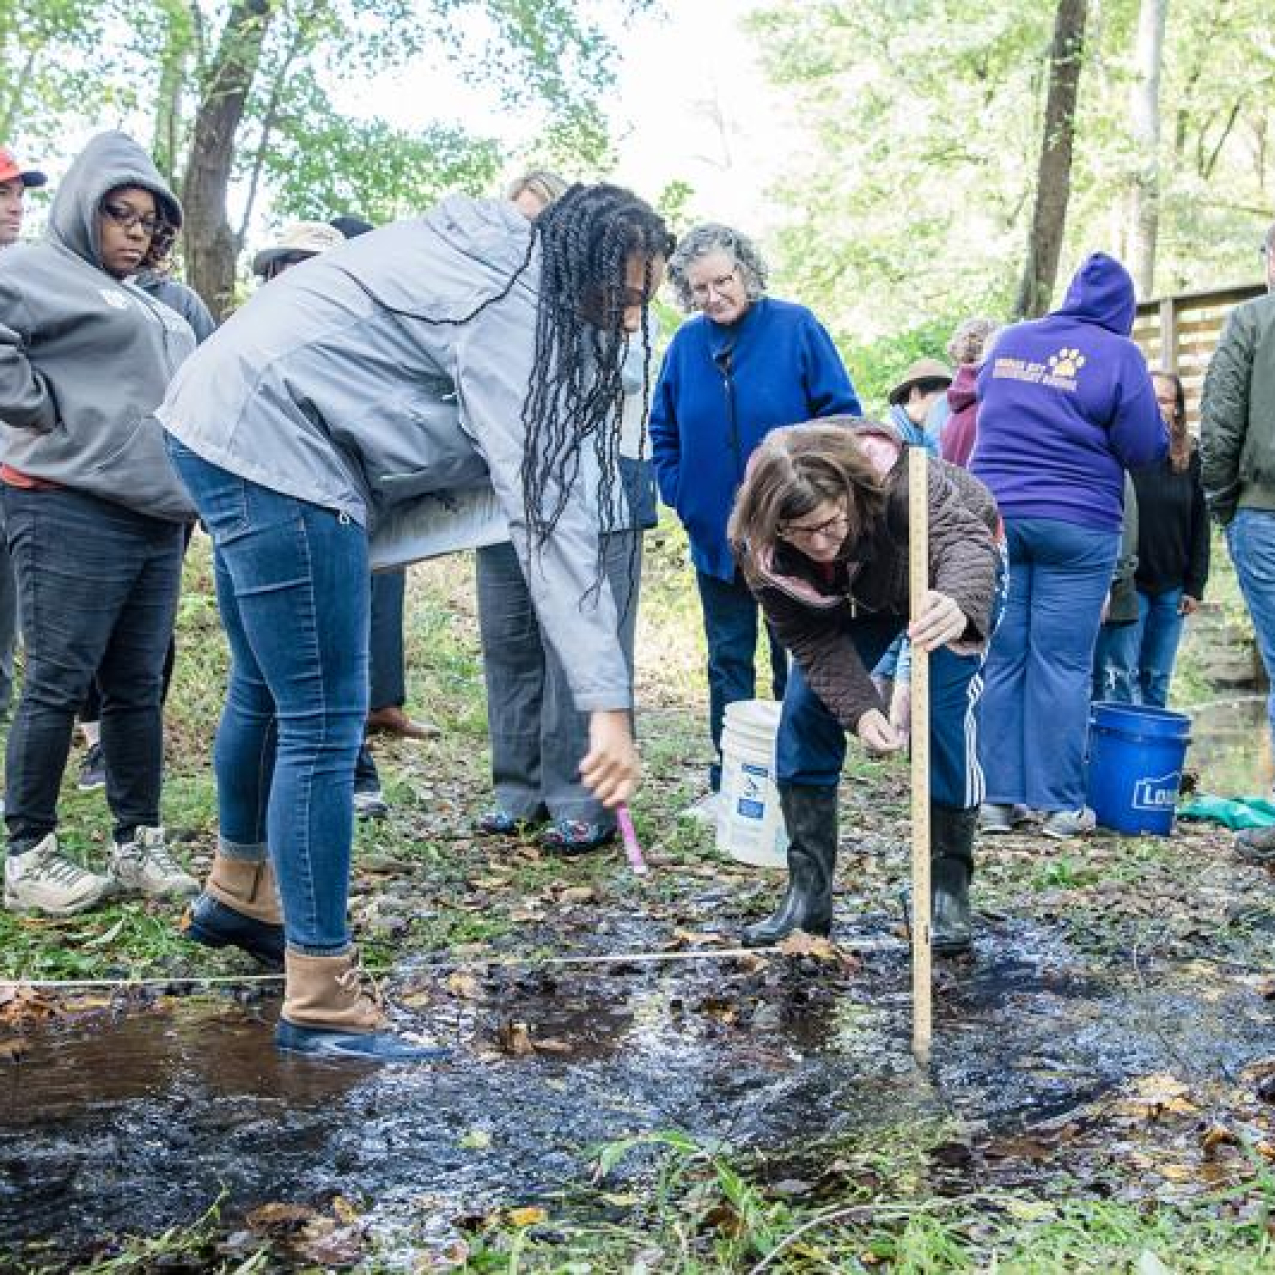 A group of educators stand together outside with buckets, meter sticks and other sampling supplies. The educators are participating in environmental education and look to be measuring a shallow puddle.